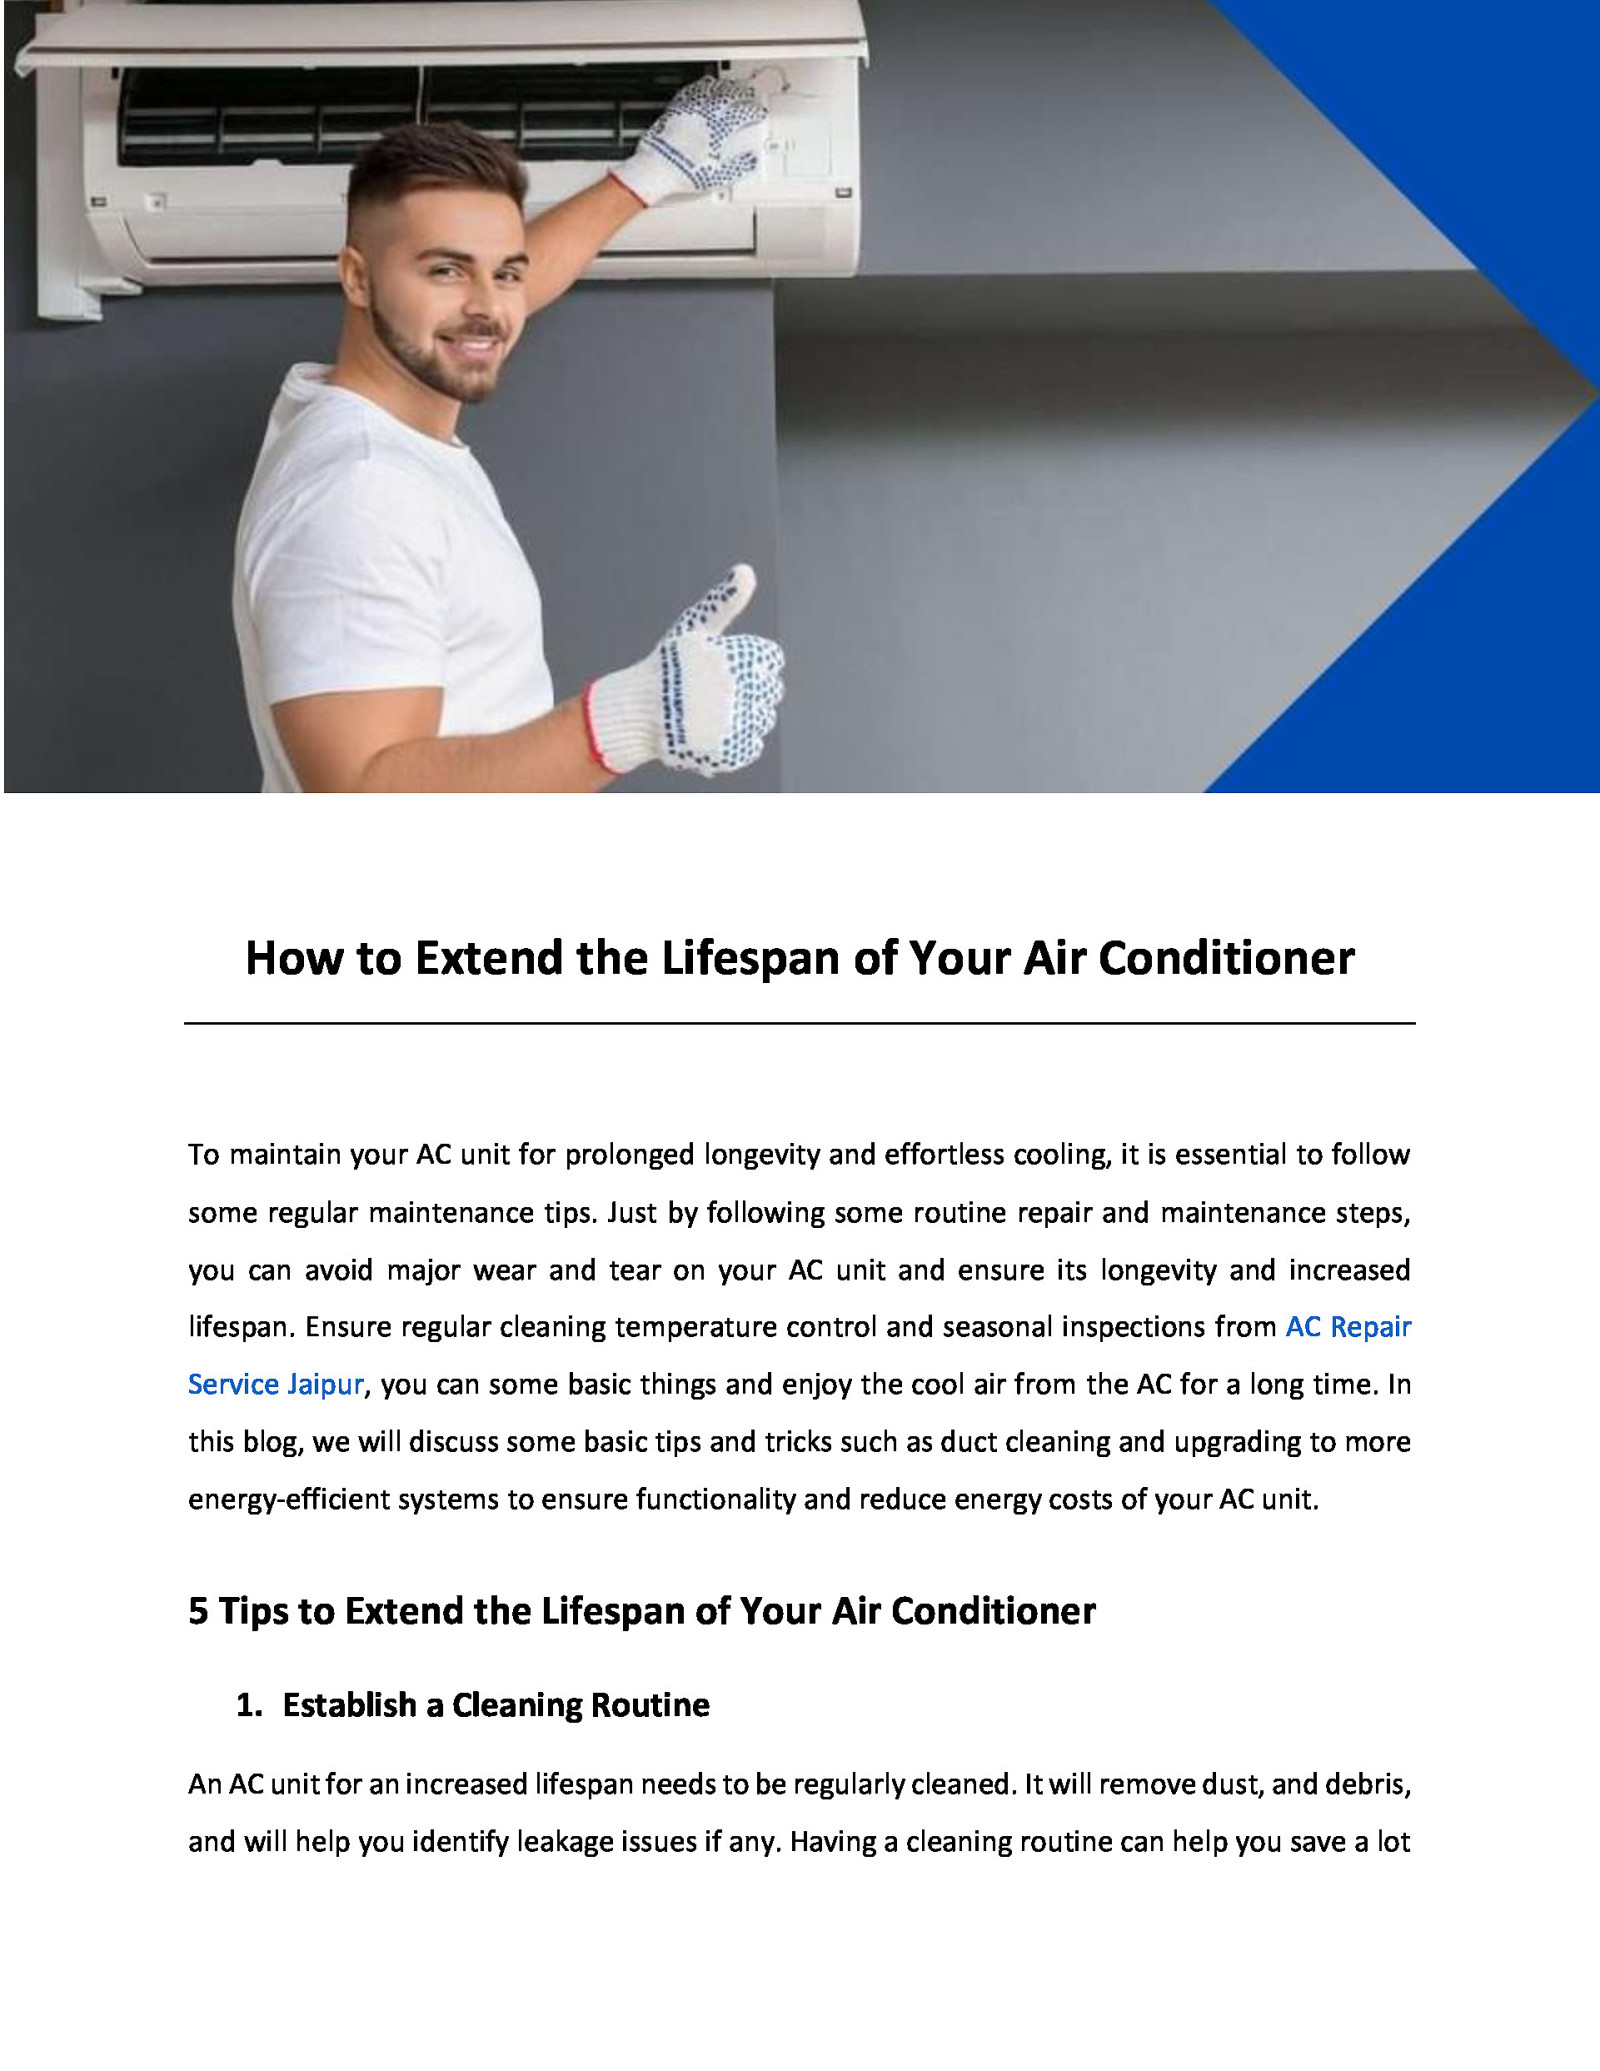 How to Extend the Lifespan of Your Air Conditioner